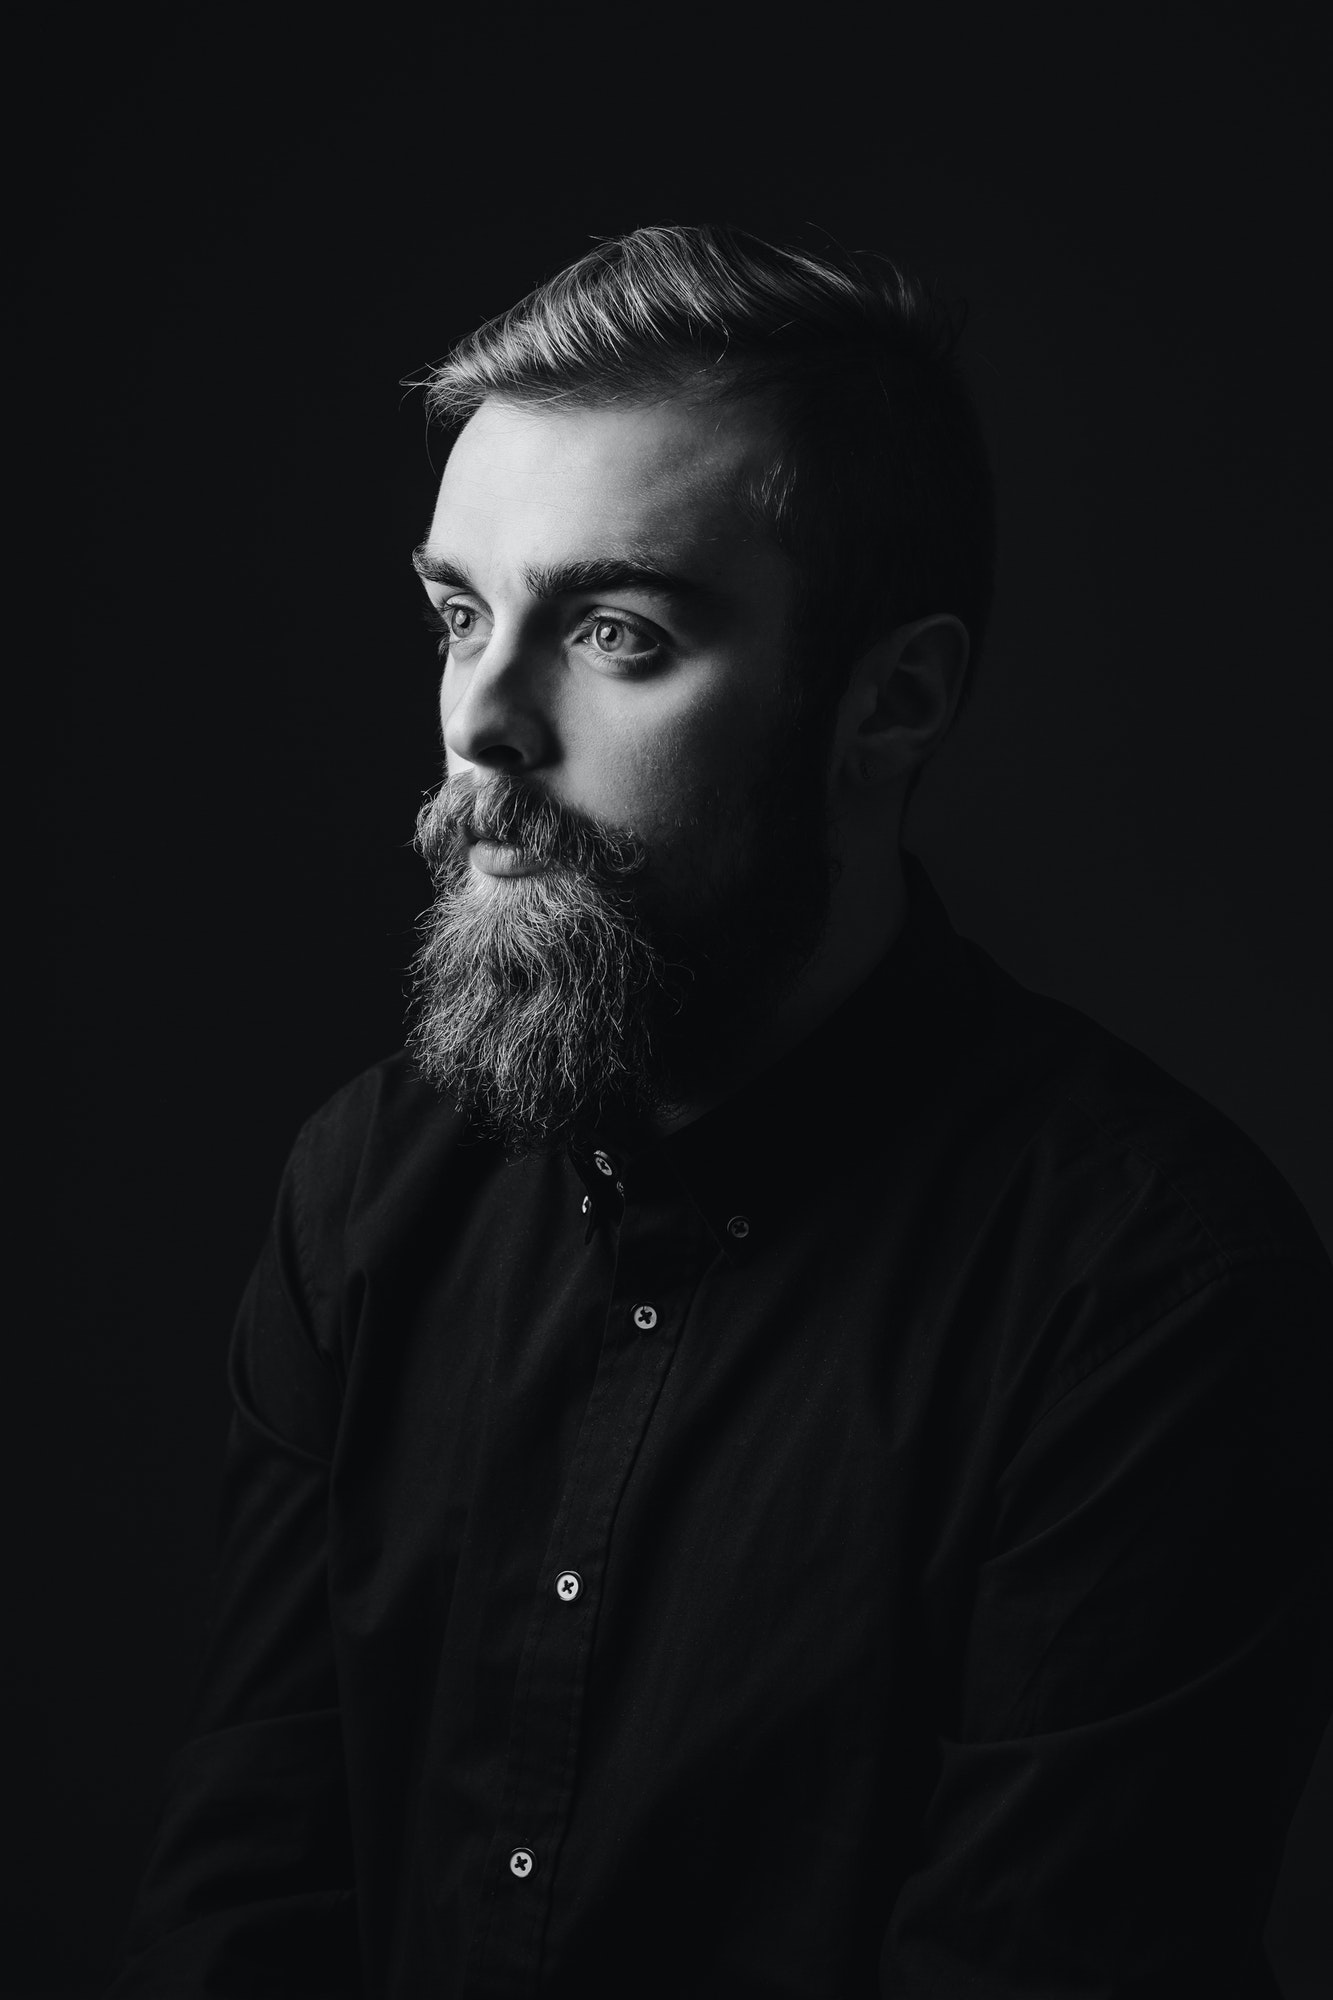 Black and white portrait of a stylish man with a beard and stylish hairdo dressed in the black shirt